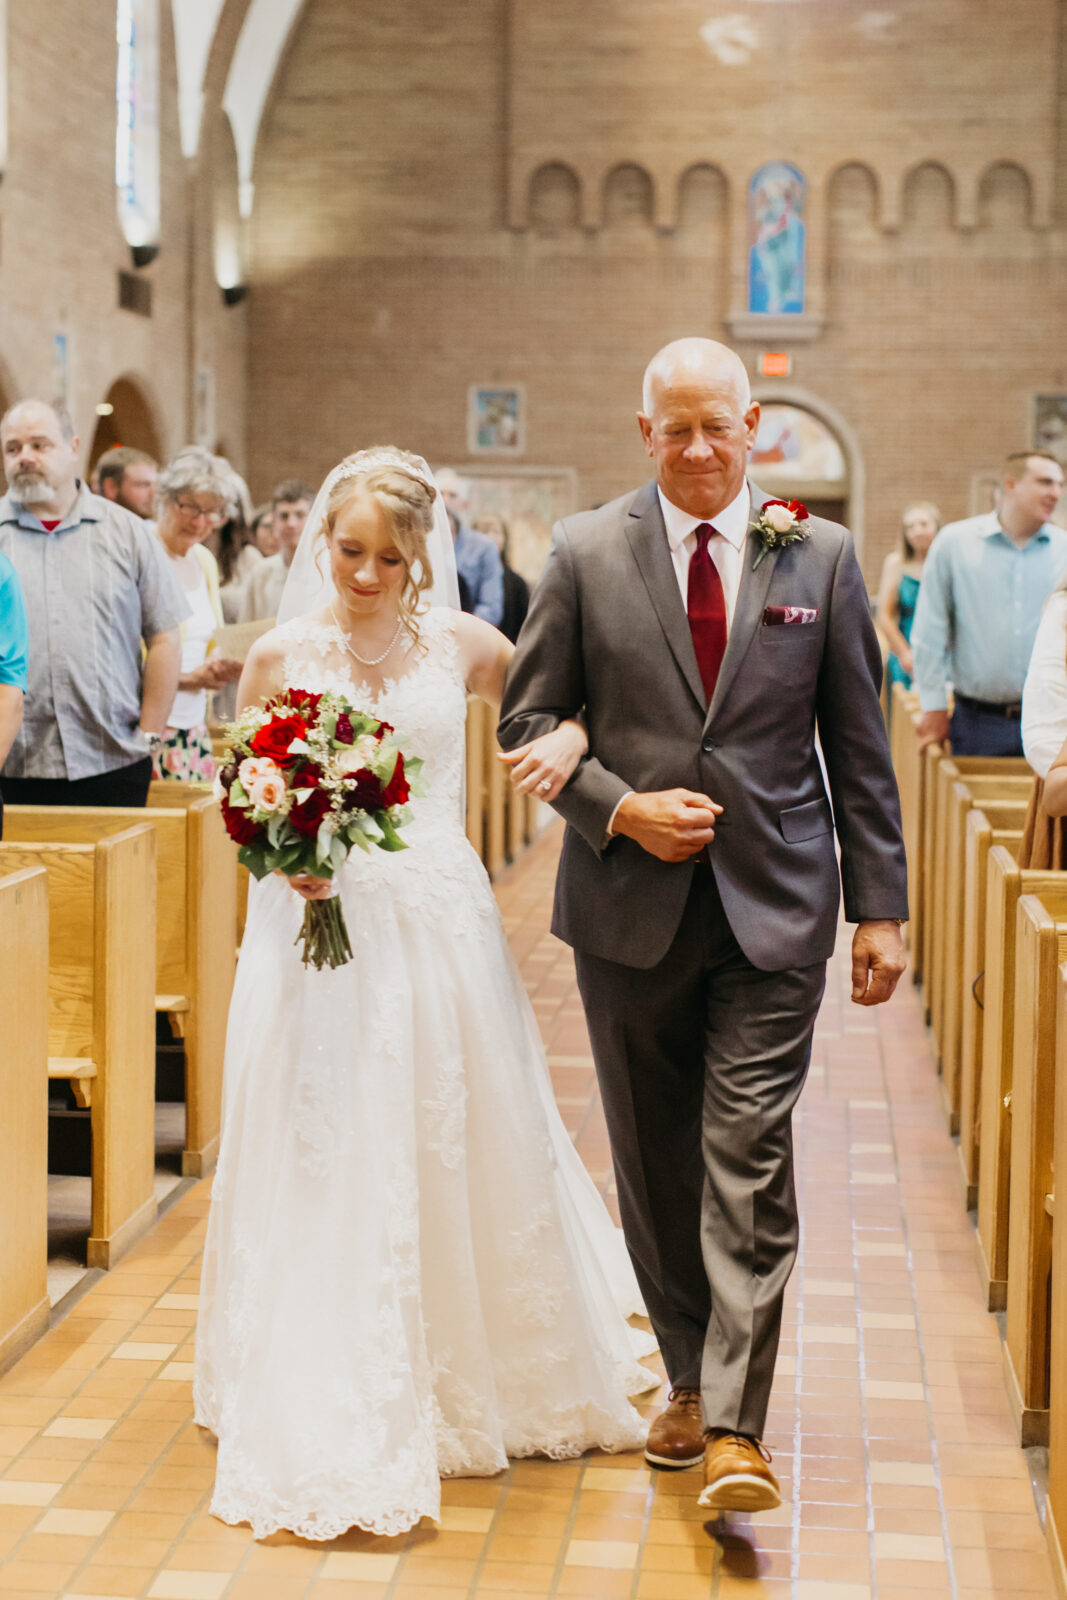 Photo of the bride being walked down the aisle with her father during her wedding day